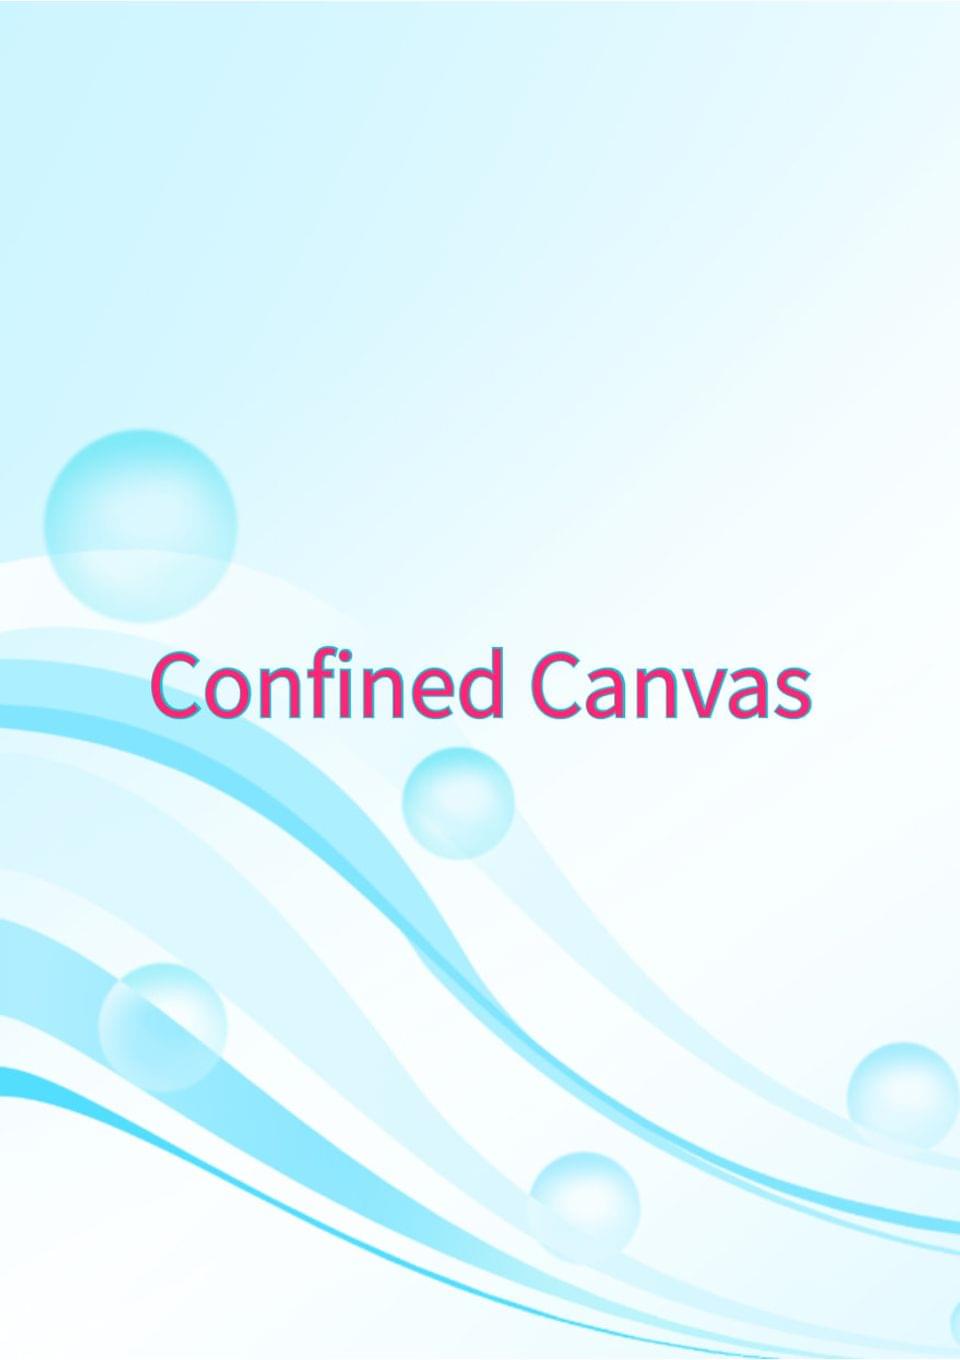 Confined Canvas